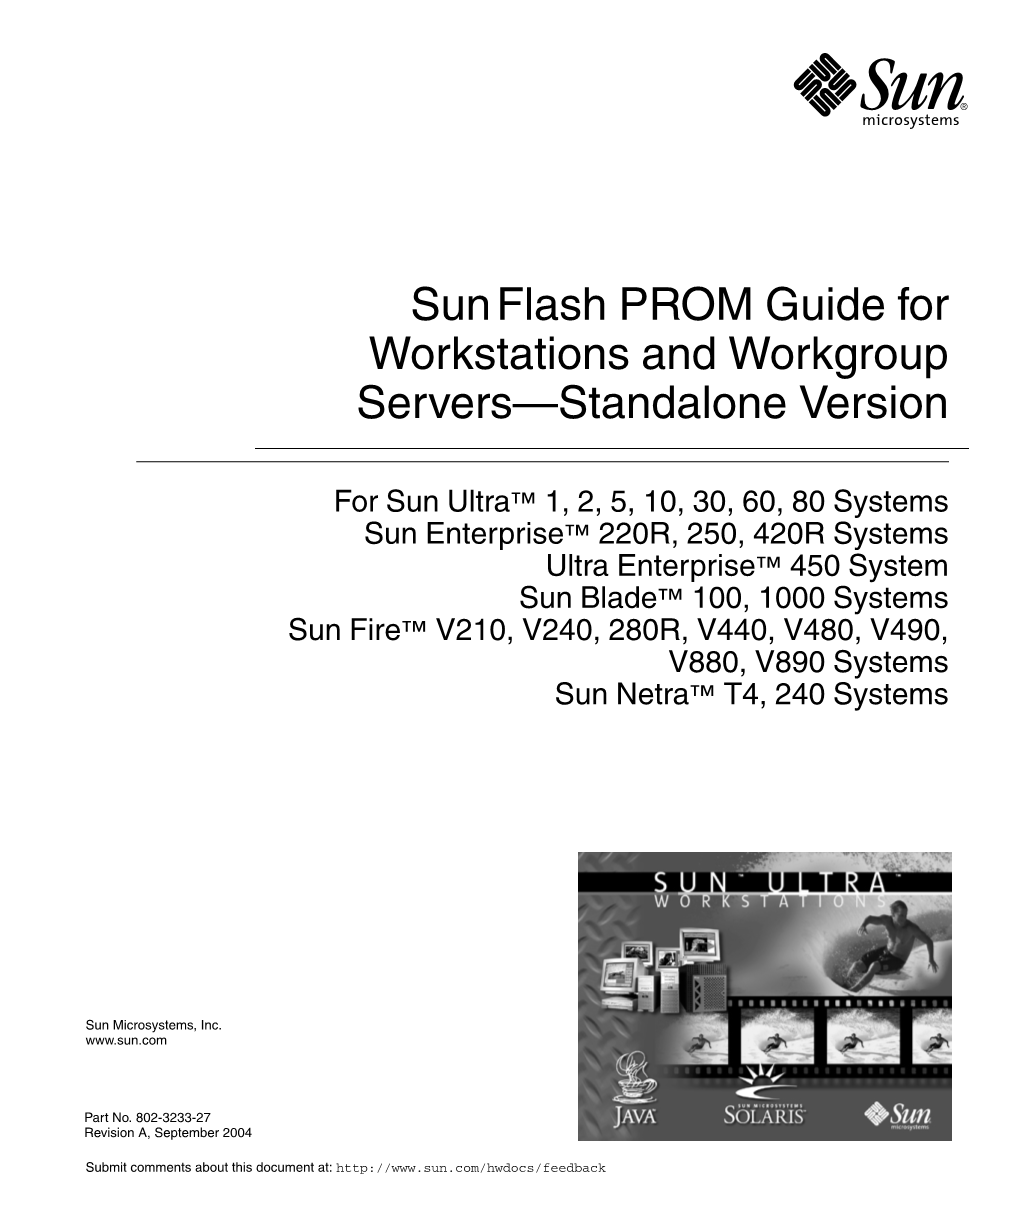 Sunflash PROM Guide for Workstations and Workgroup